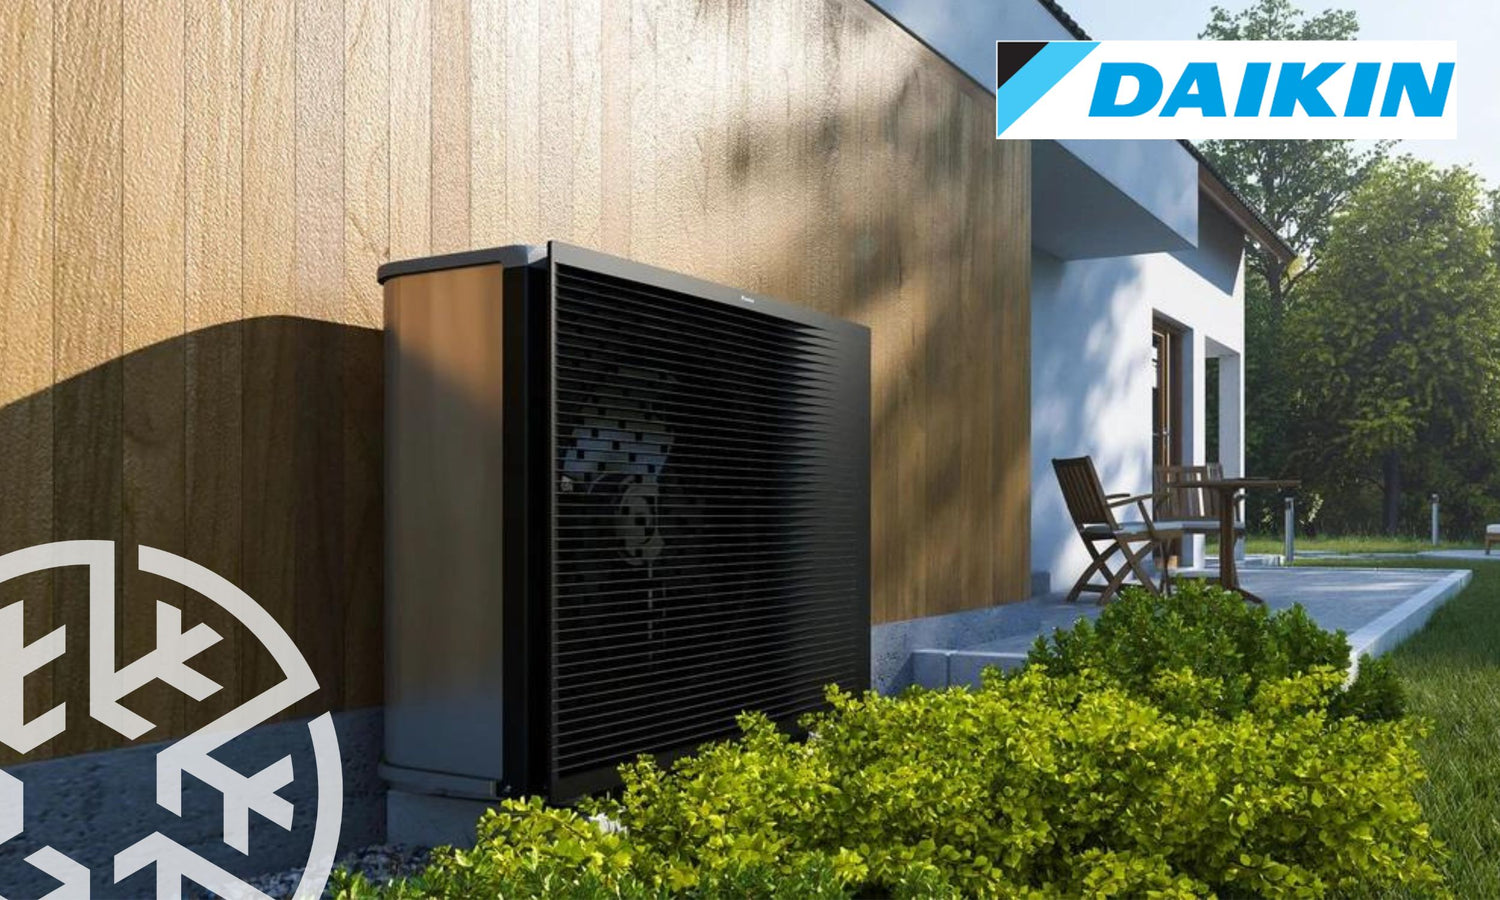 Daikin's New Summer Campaign: Air Conditioning